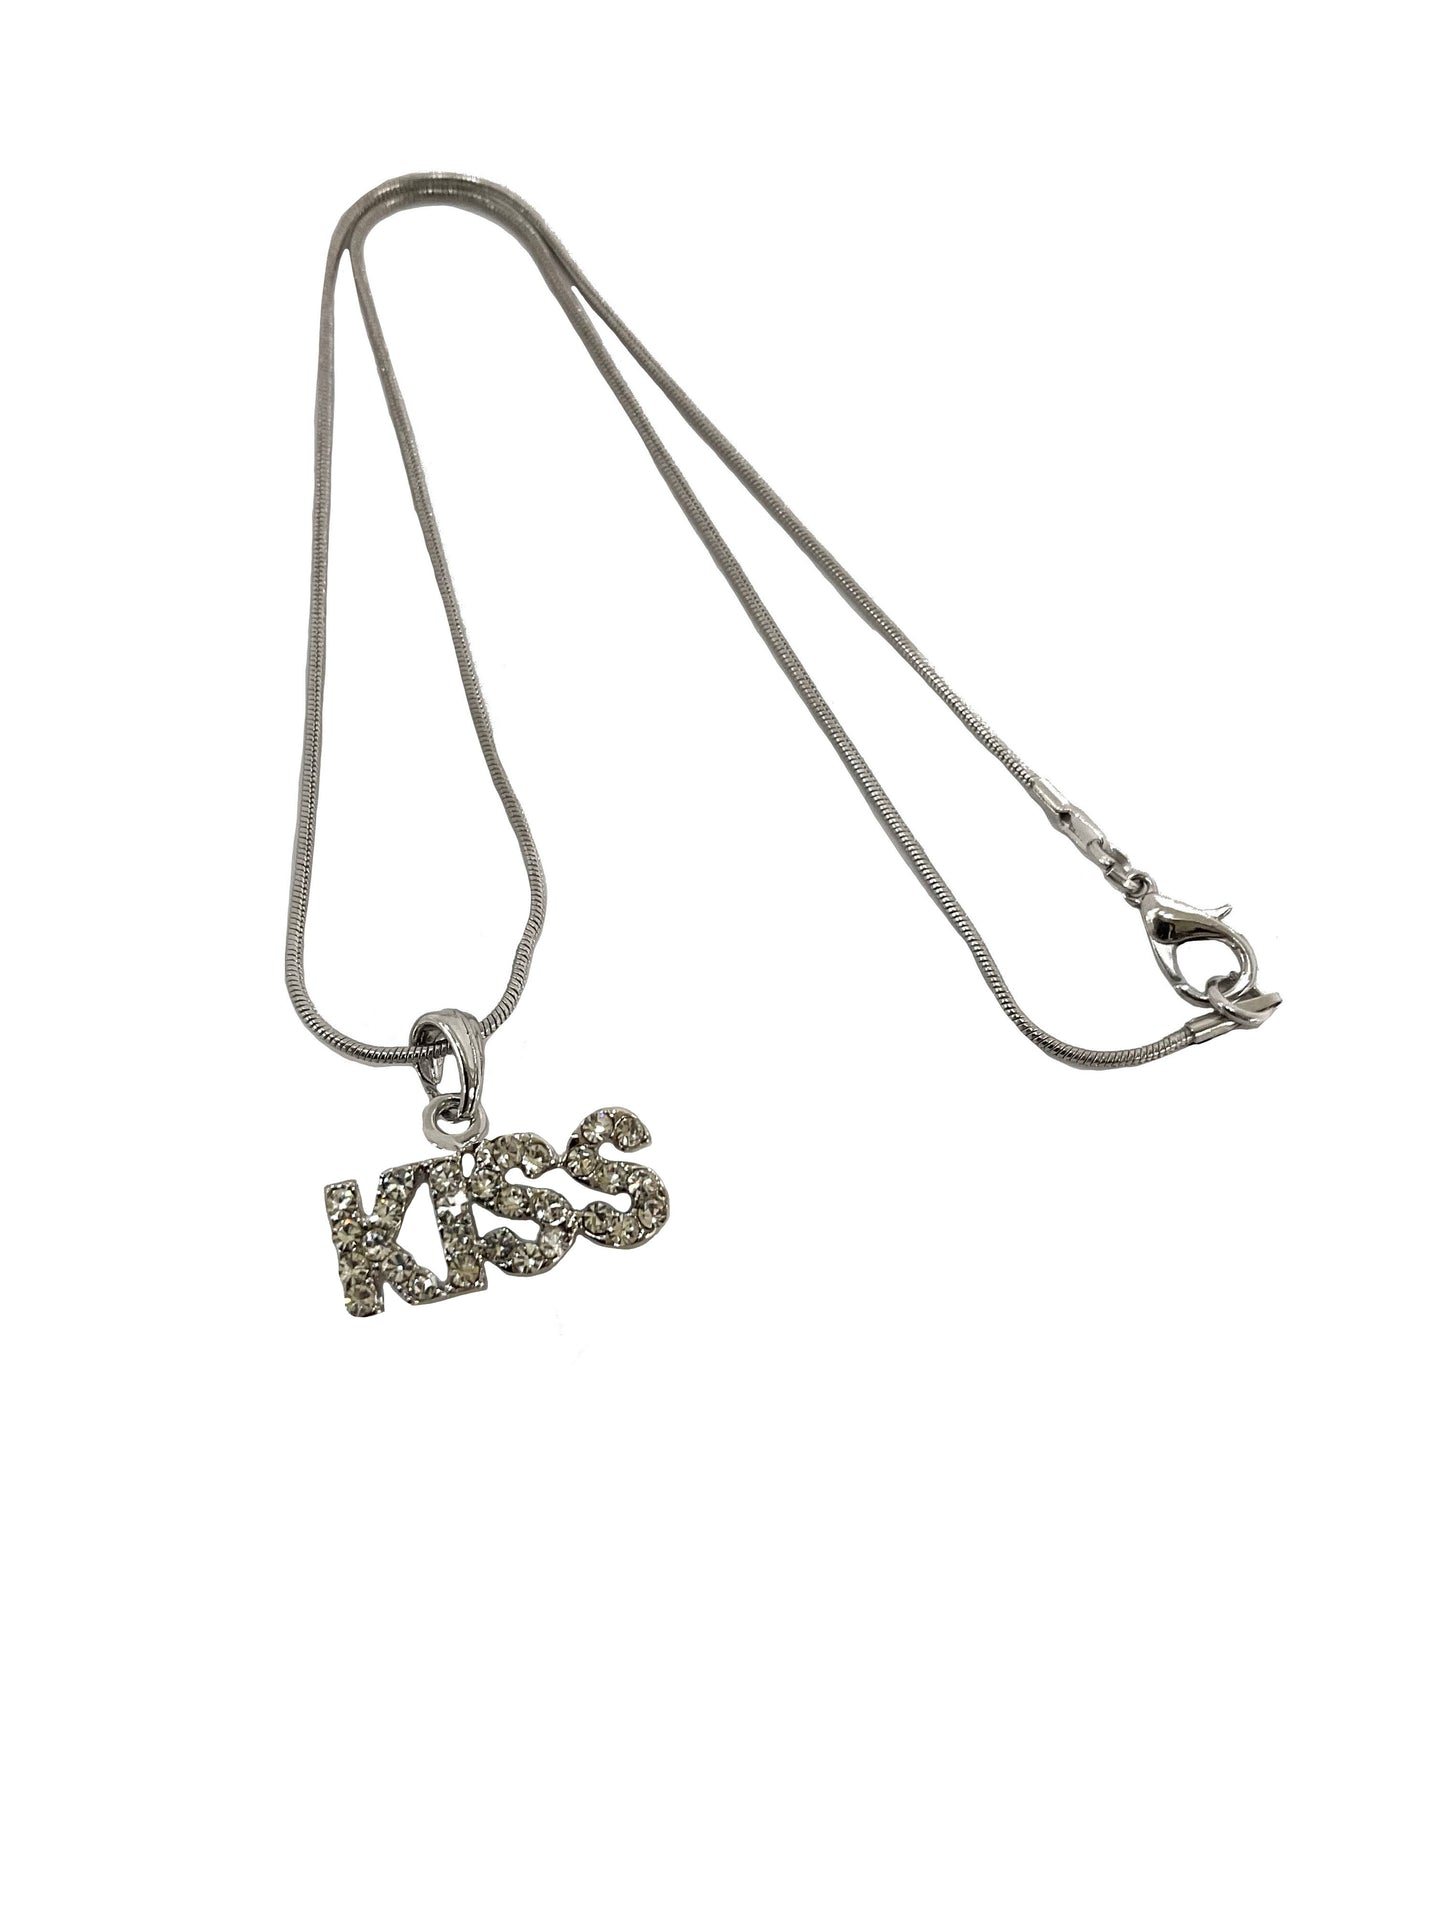 'KISS' Necklace #27-2704